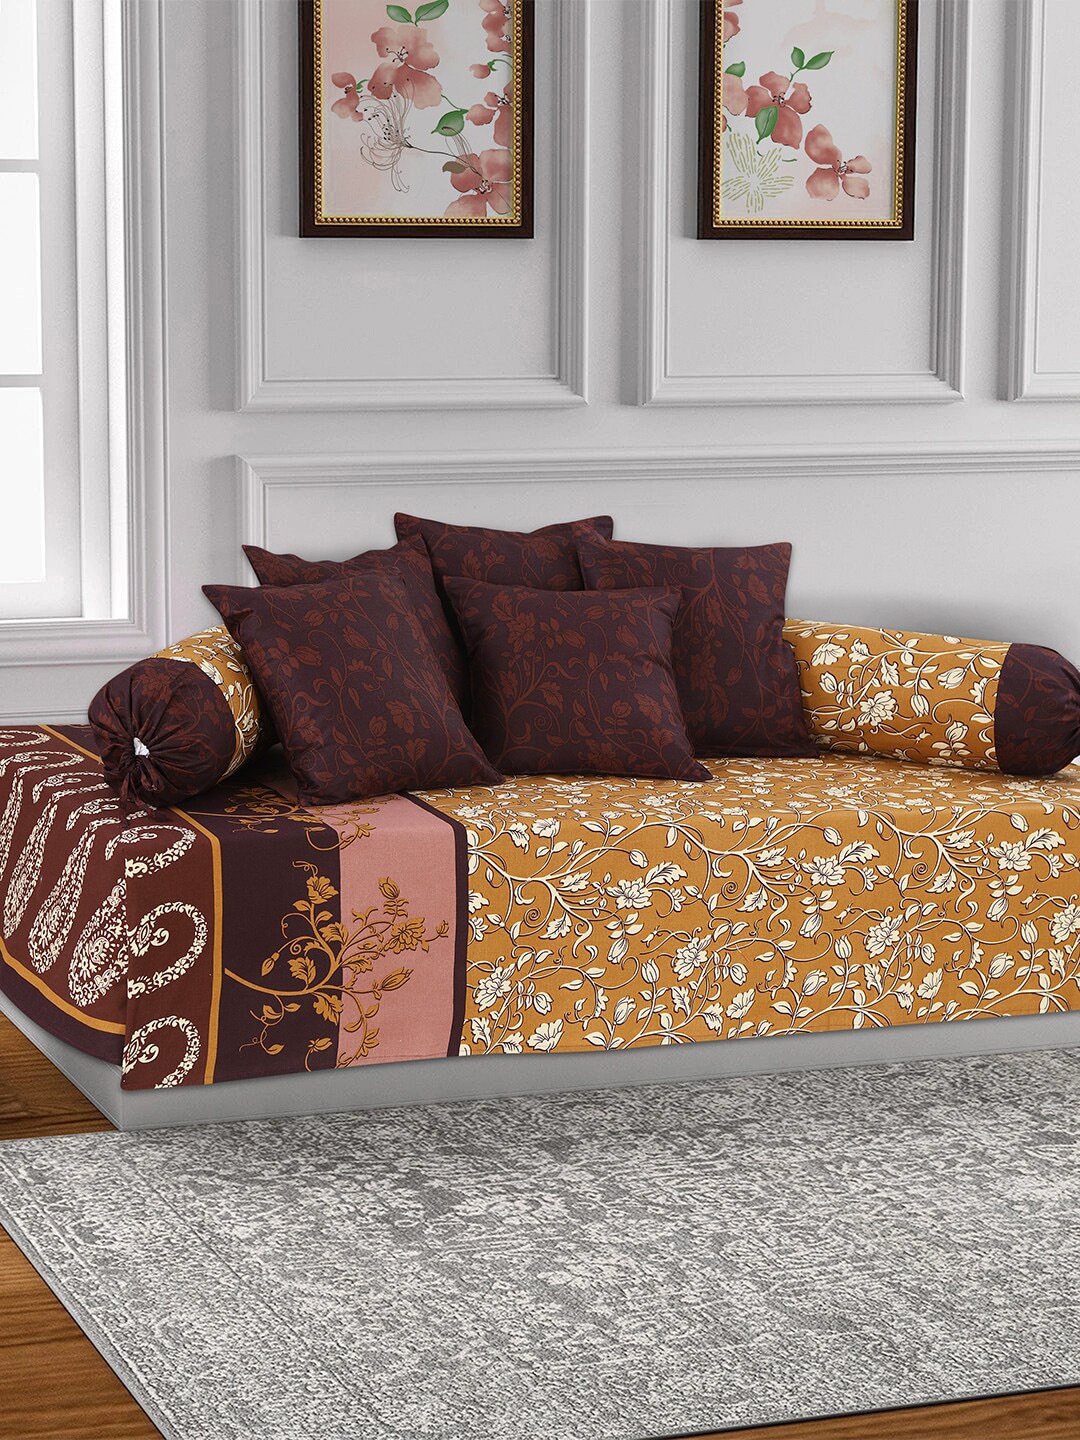 Salona Bichona Set Of 6 Brown & White Floral Printed Cotton Bedsheet With Bolster & Cushion Covers Price in India